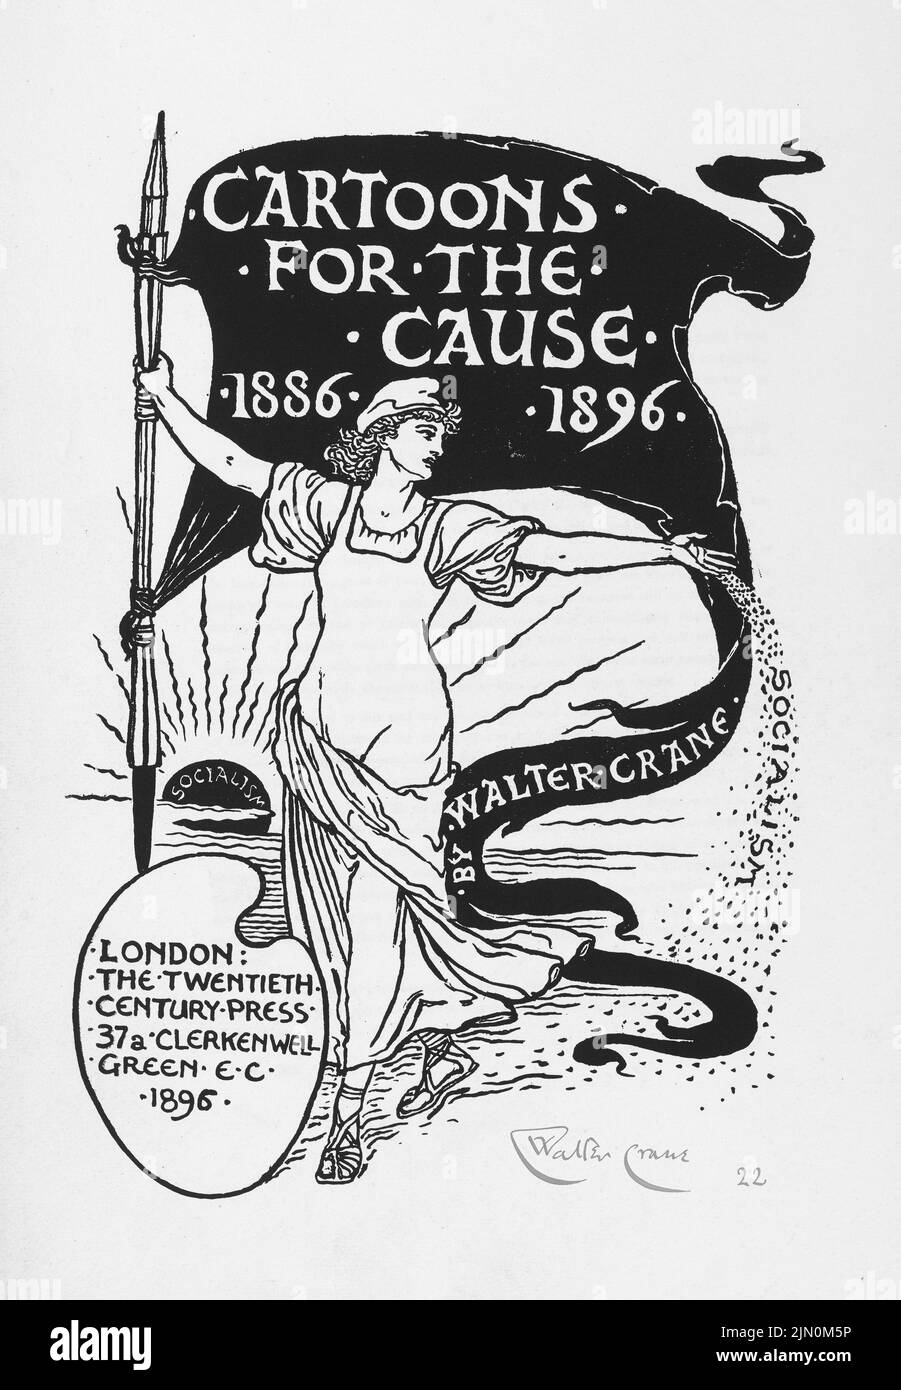 Title page illustration by Walter Crane from Cartoons for the Cause 1886-1896, International Socialist Workers. Stock Photo